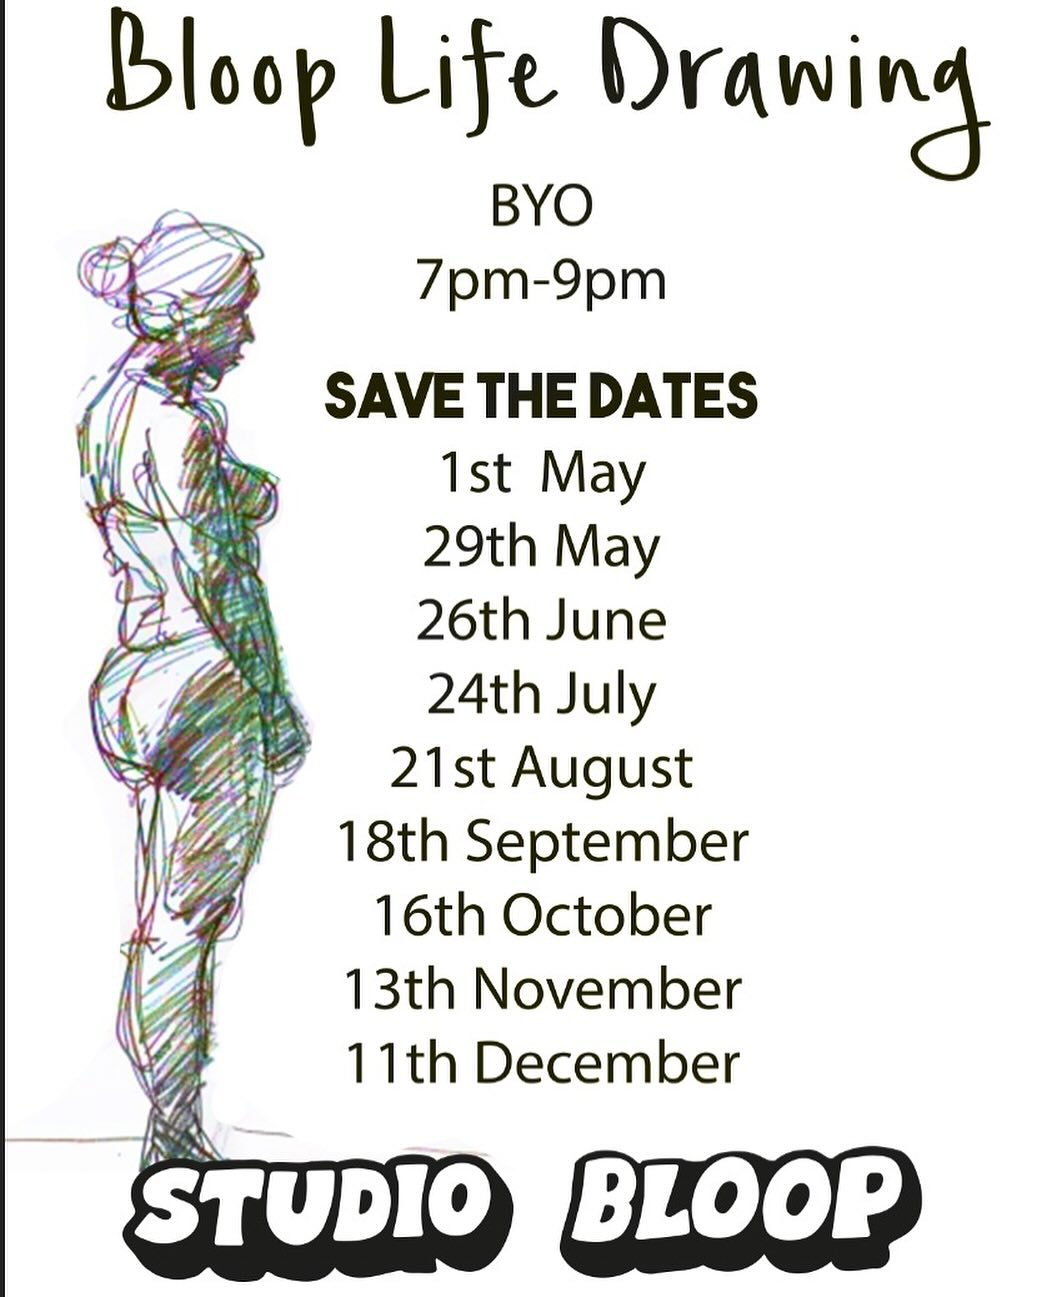 🍷🪩🎨🌛🌈🪬 
Monthly life drawing at studio bloop.
Save the dates, 
bookings via link in bio or our website.
Bring your friends for some lush vibes 
.
.
.
#lifedrawing #innerwest #studiobloop #classbento #sydney #rozelle #lilyfield #balmain #drummoy